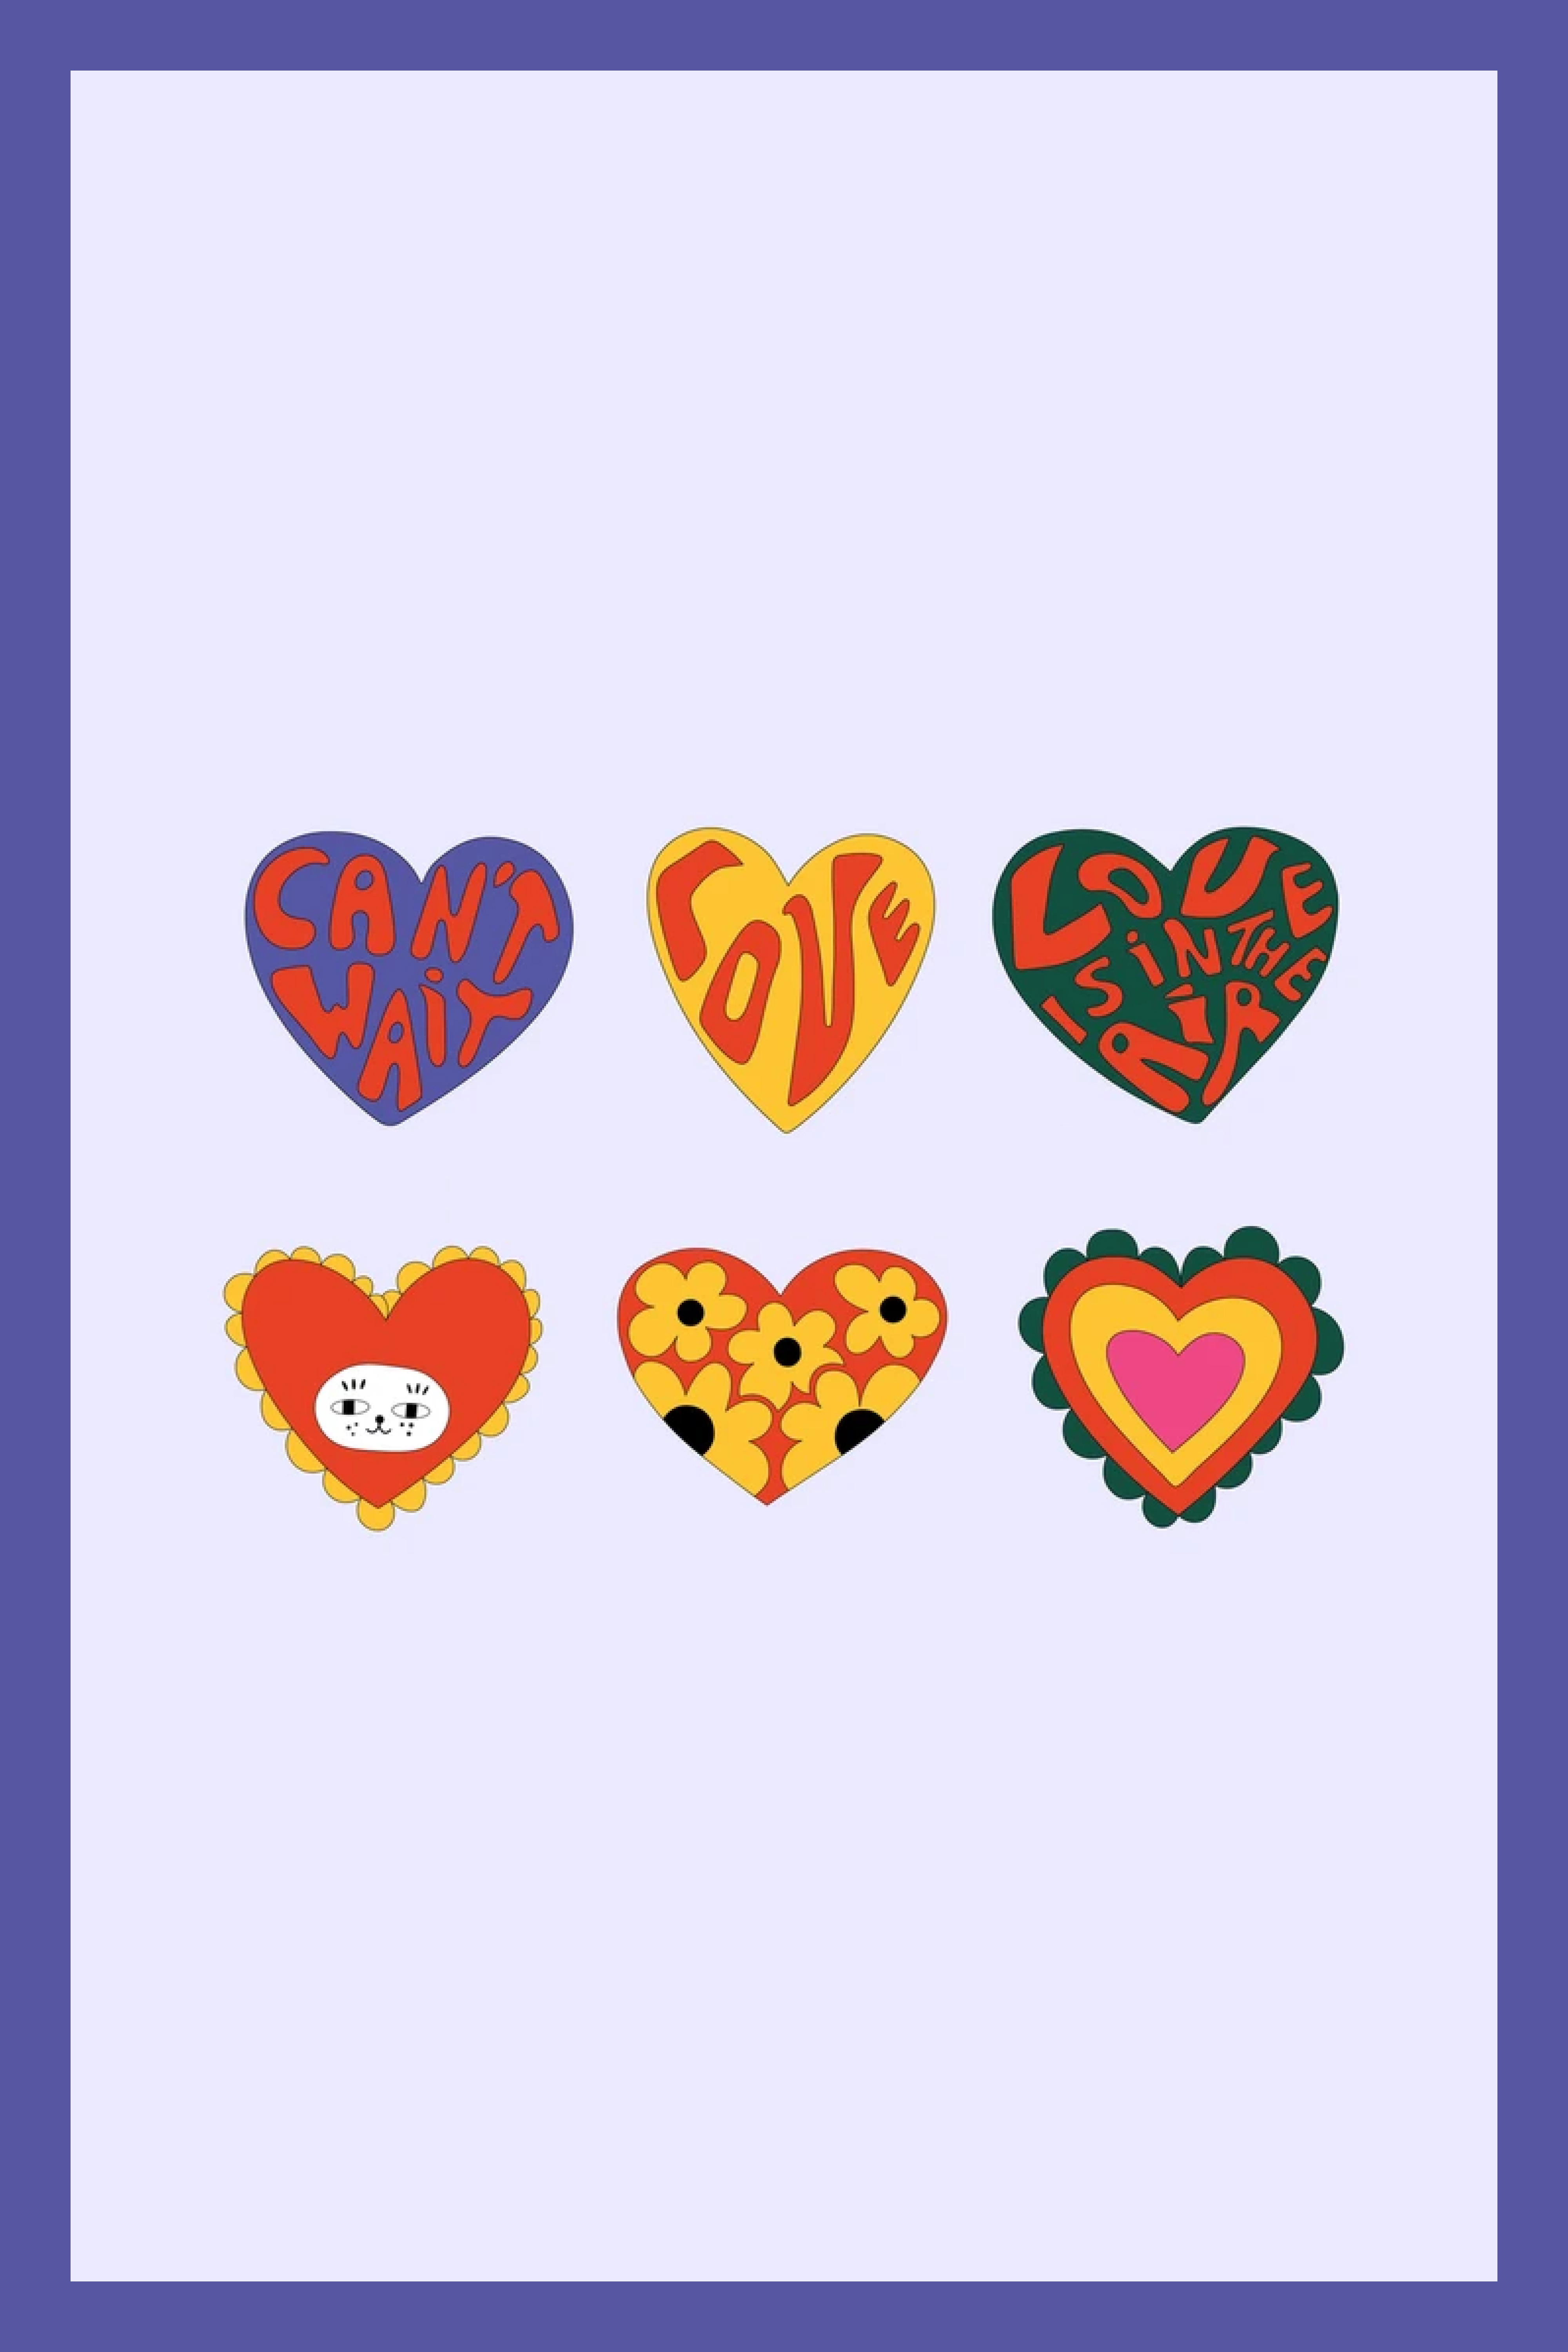 Six hearts in different hippie colors on a purple background.